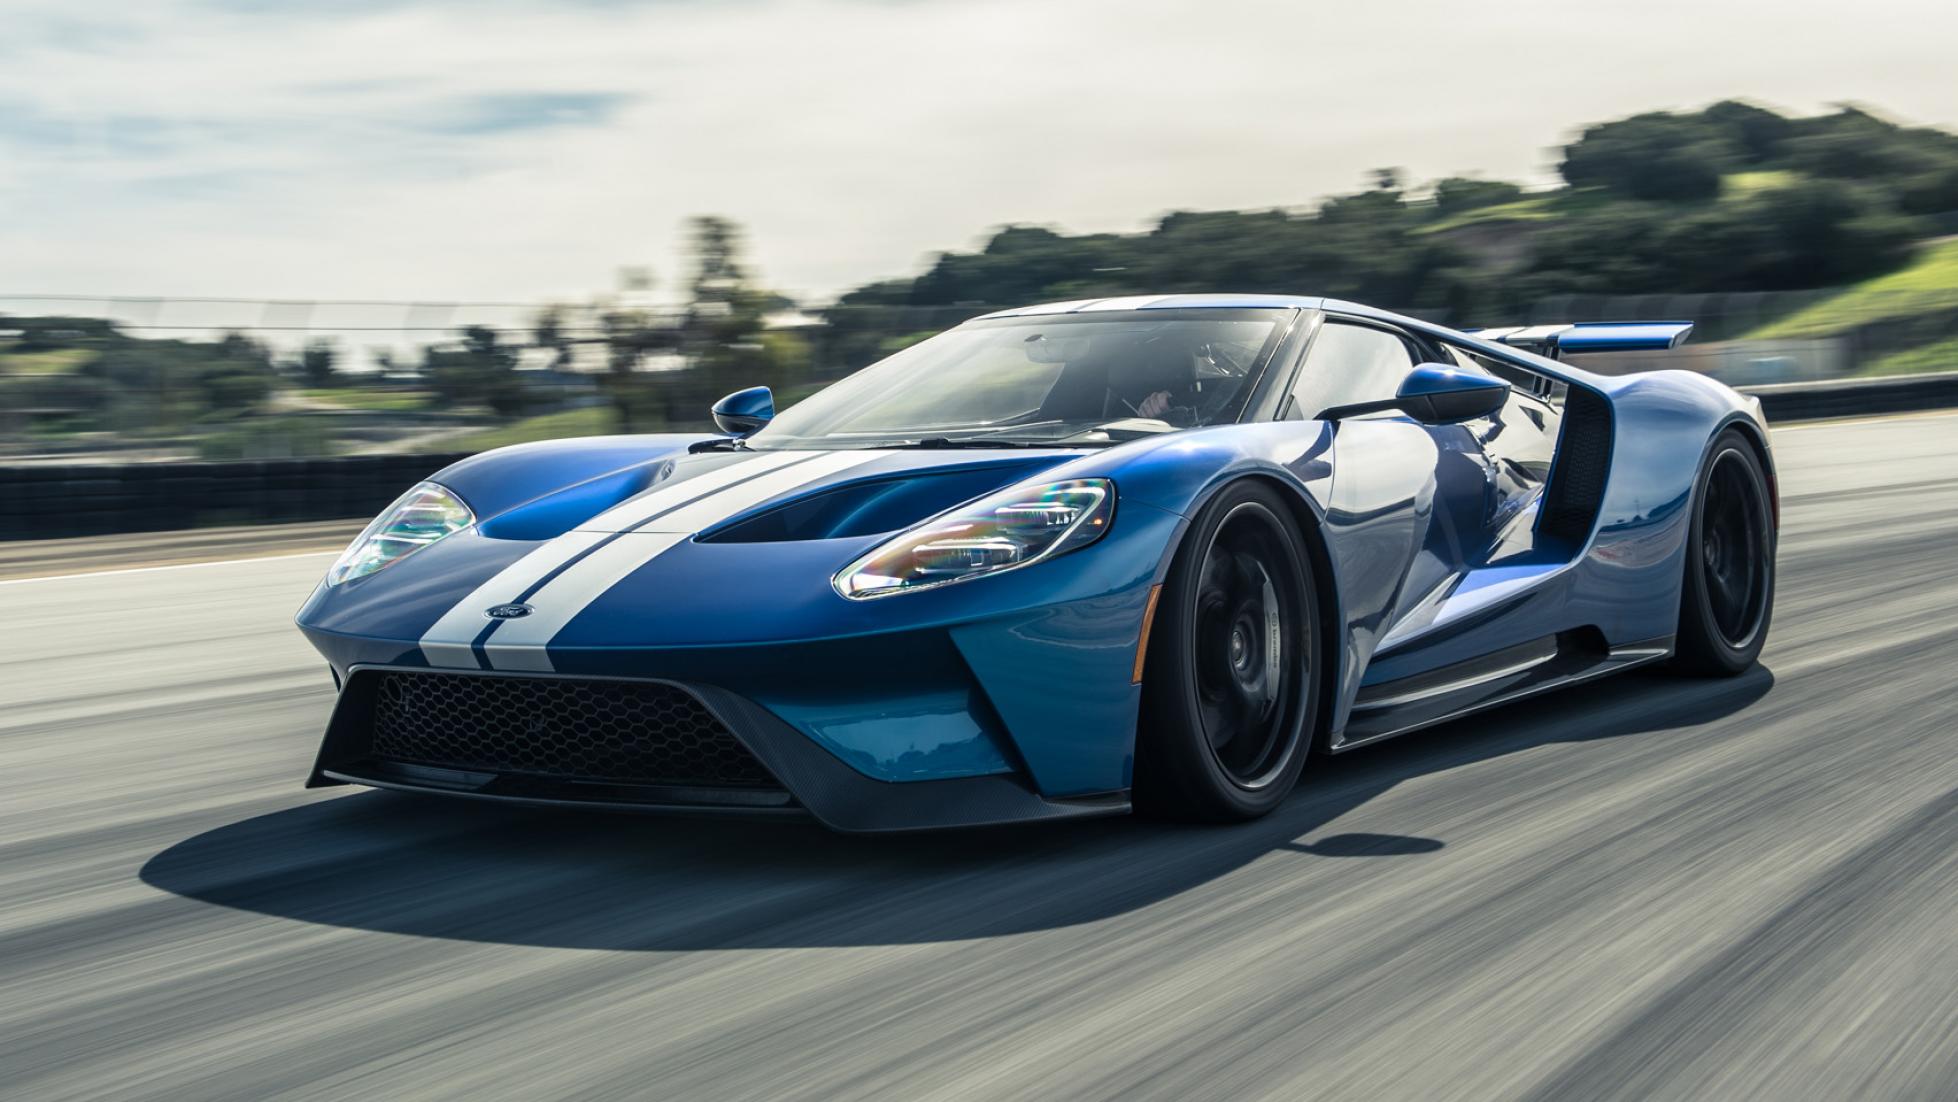 FORD GT 2020